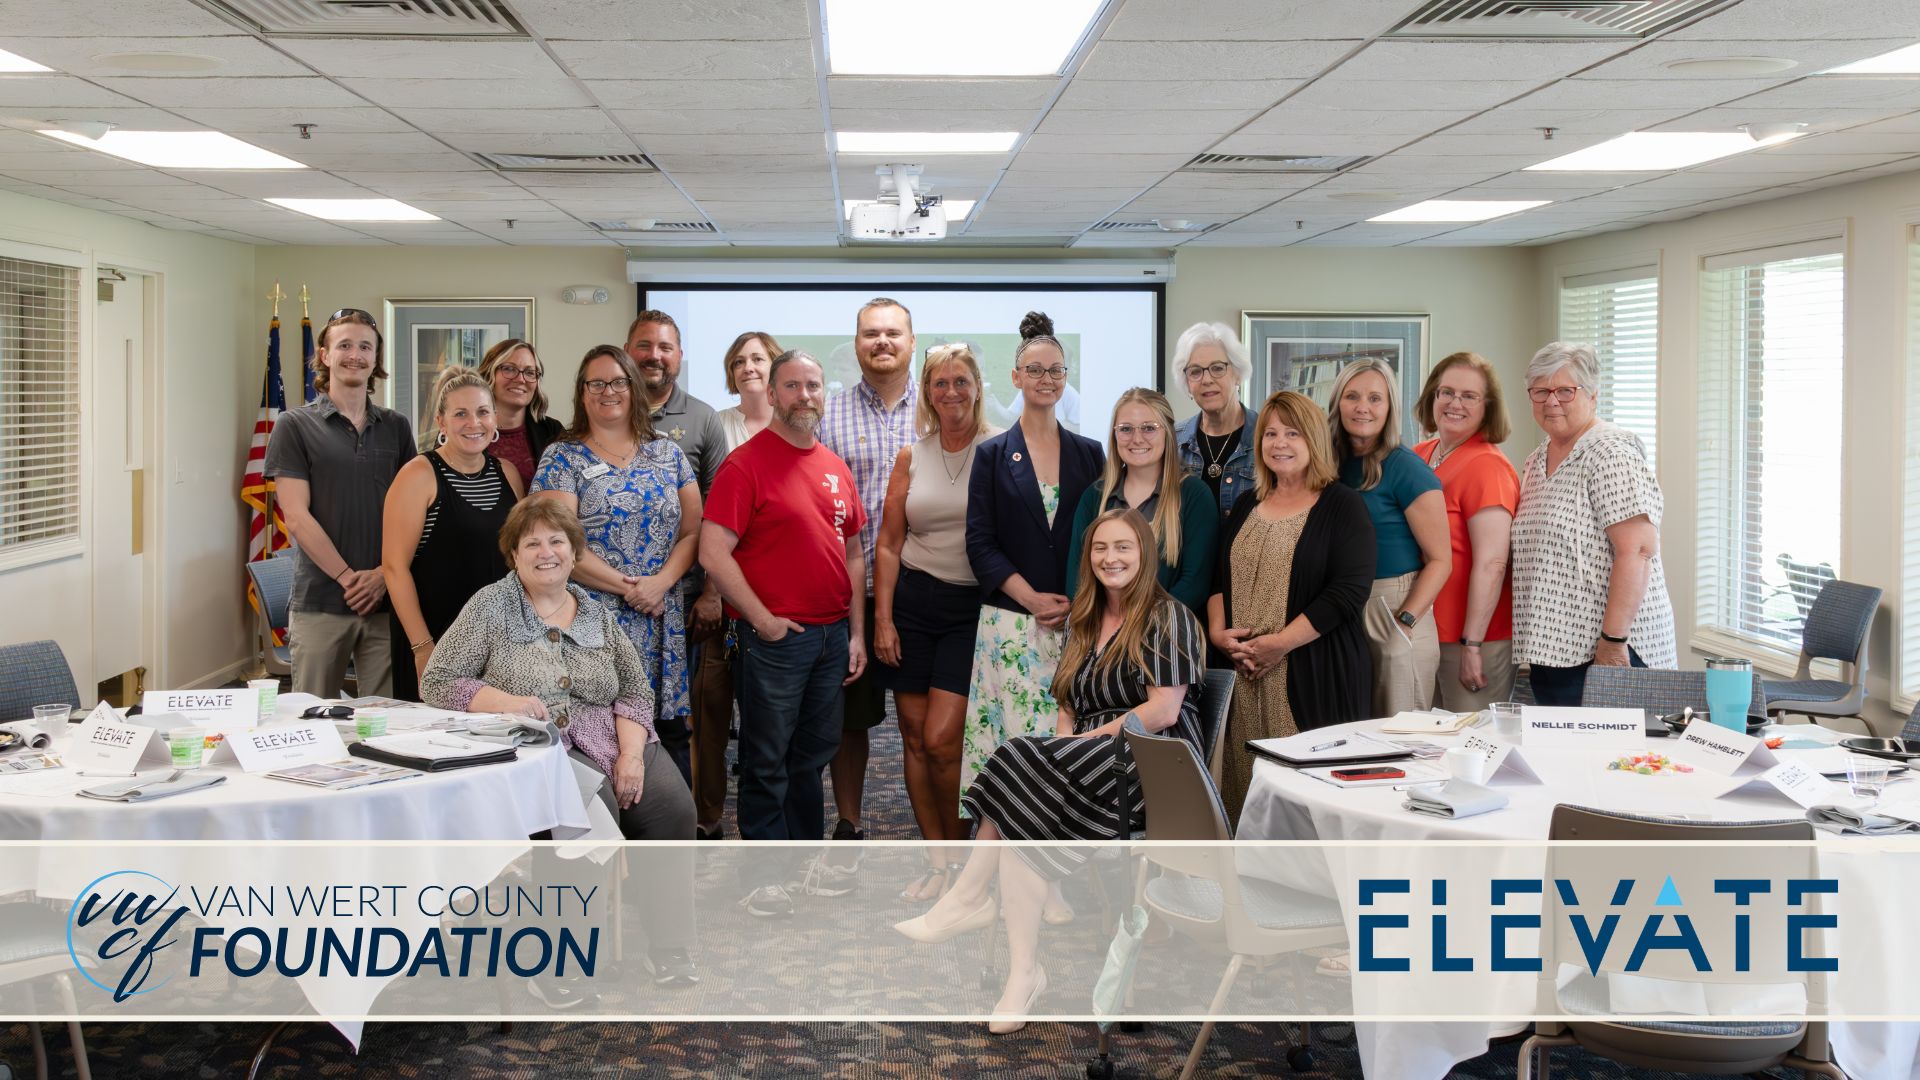 Group photo of participants from the ELEVATE Program Financial and Legal Session with Beth Short, organized by the Van Wert County Foundation.